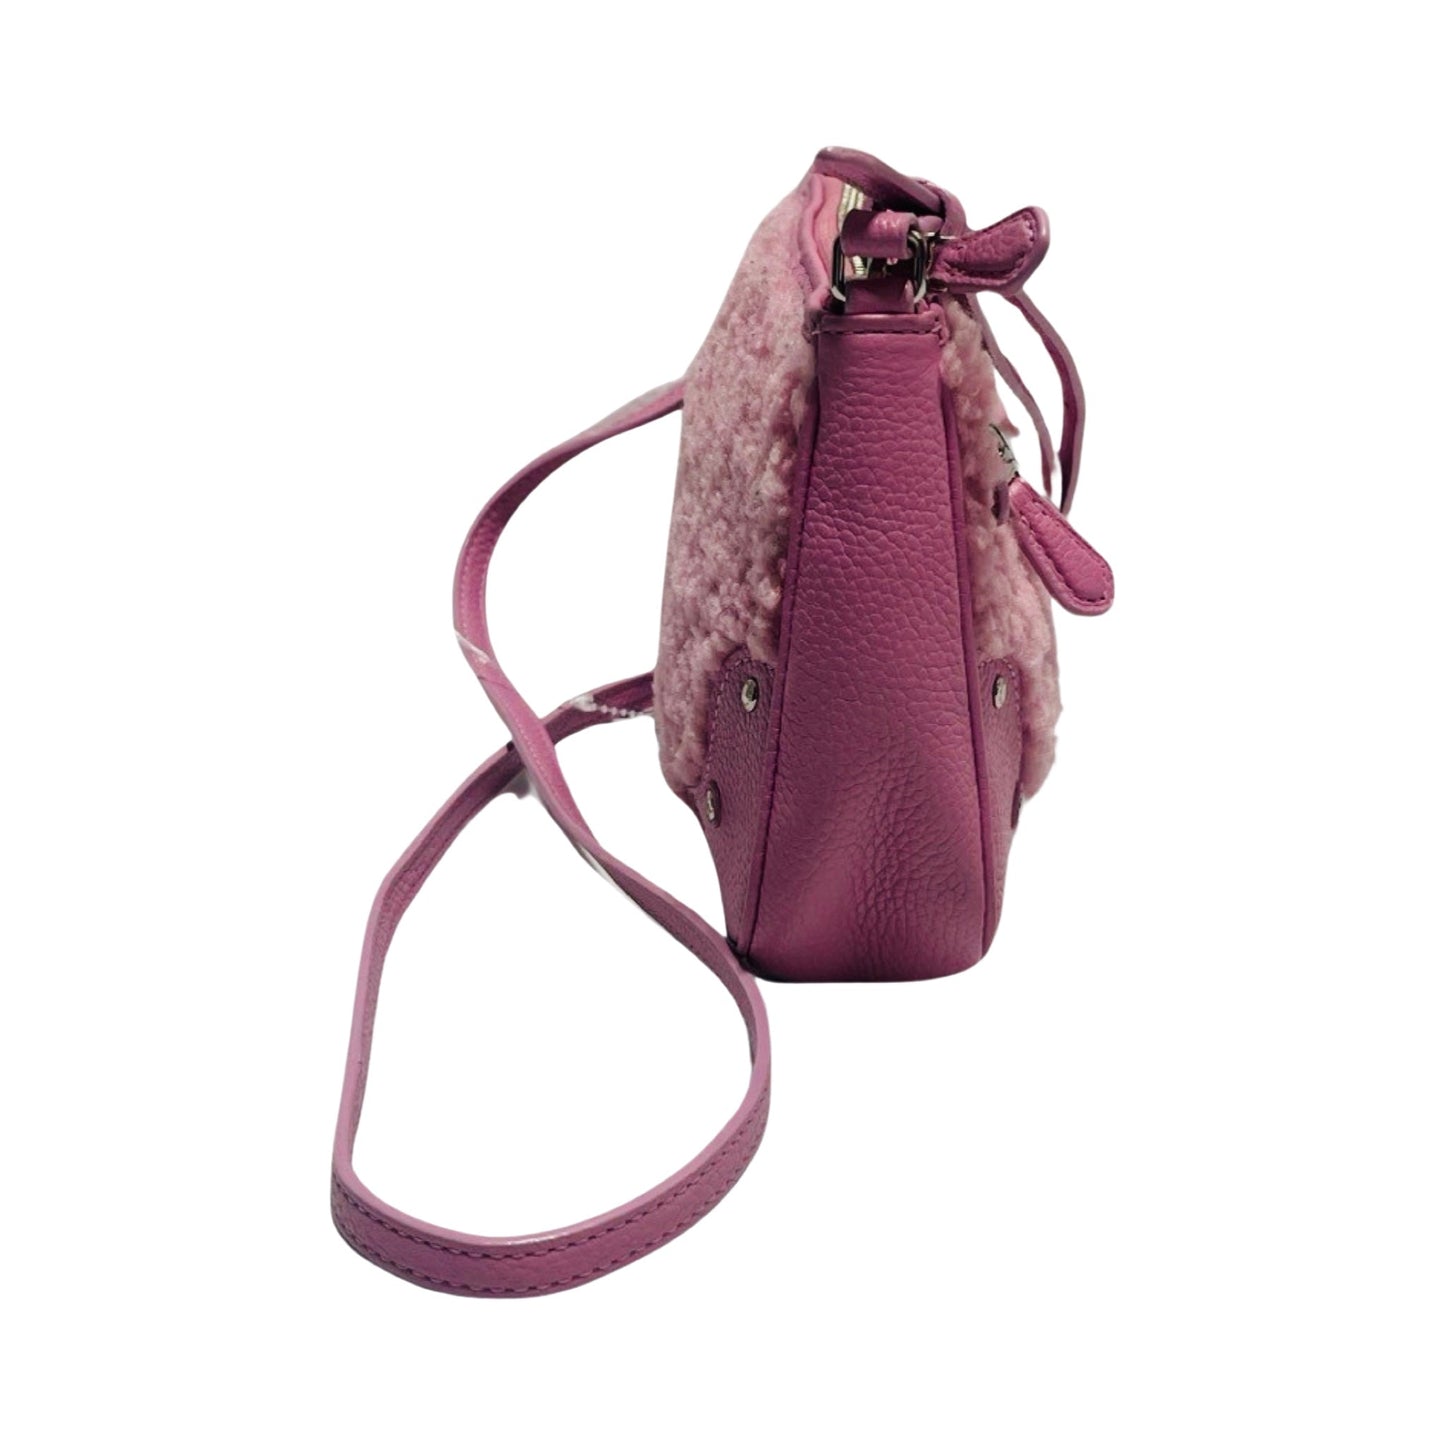 Shearling Leather Rhyder Pochette Zip Closure Pink Marshmallow with Silver Accents Crossbody/Shoulder Designer By Coach  Size: Small